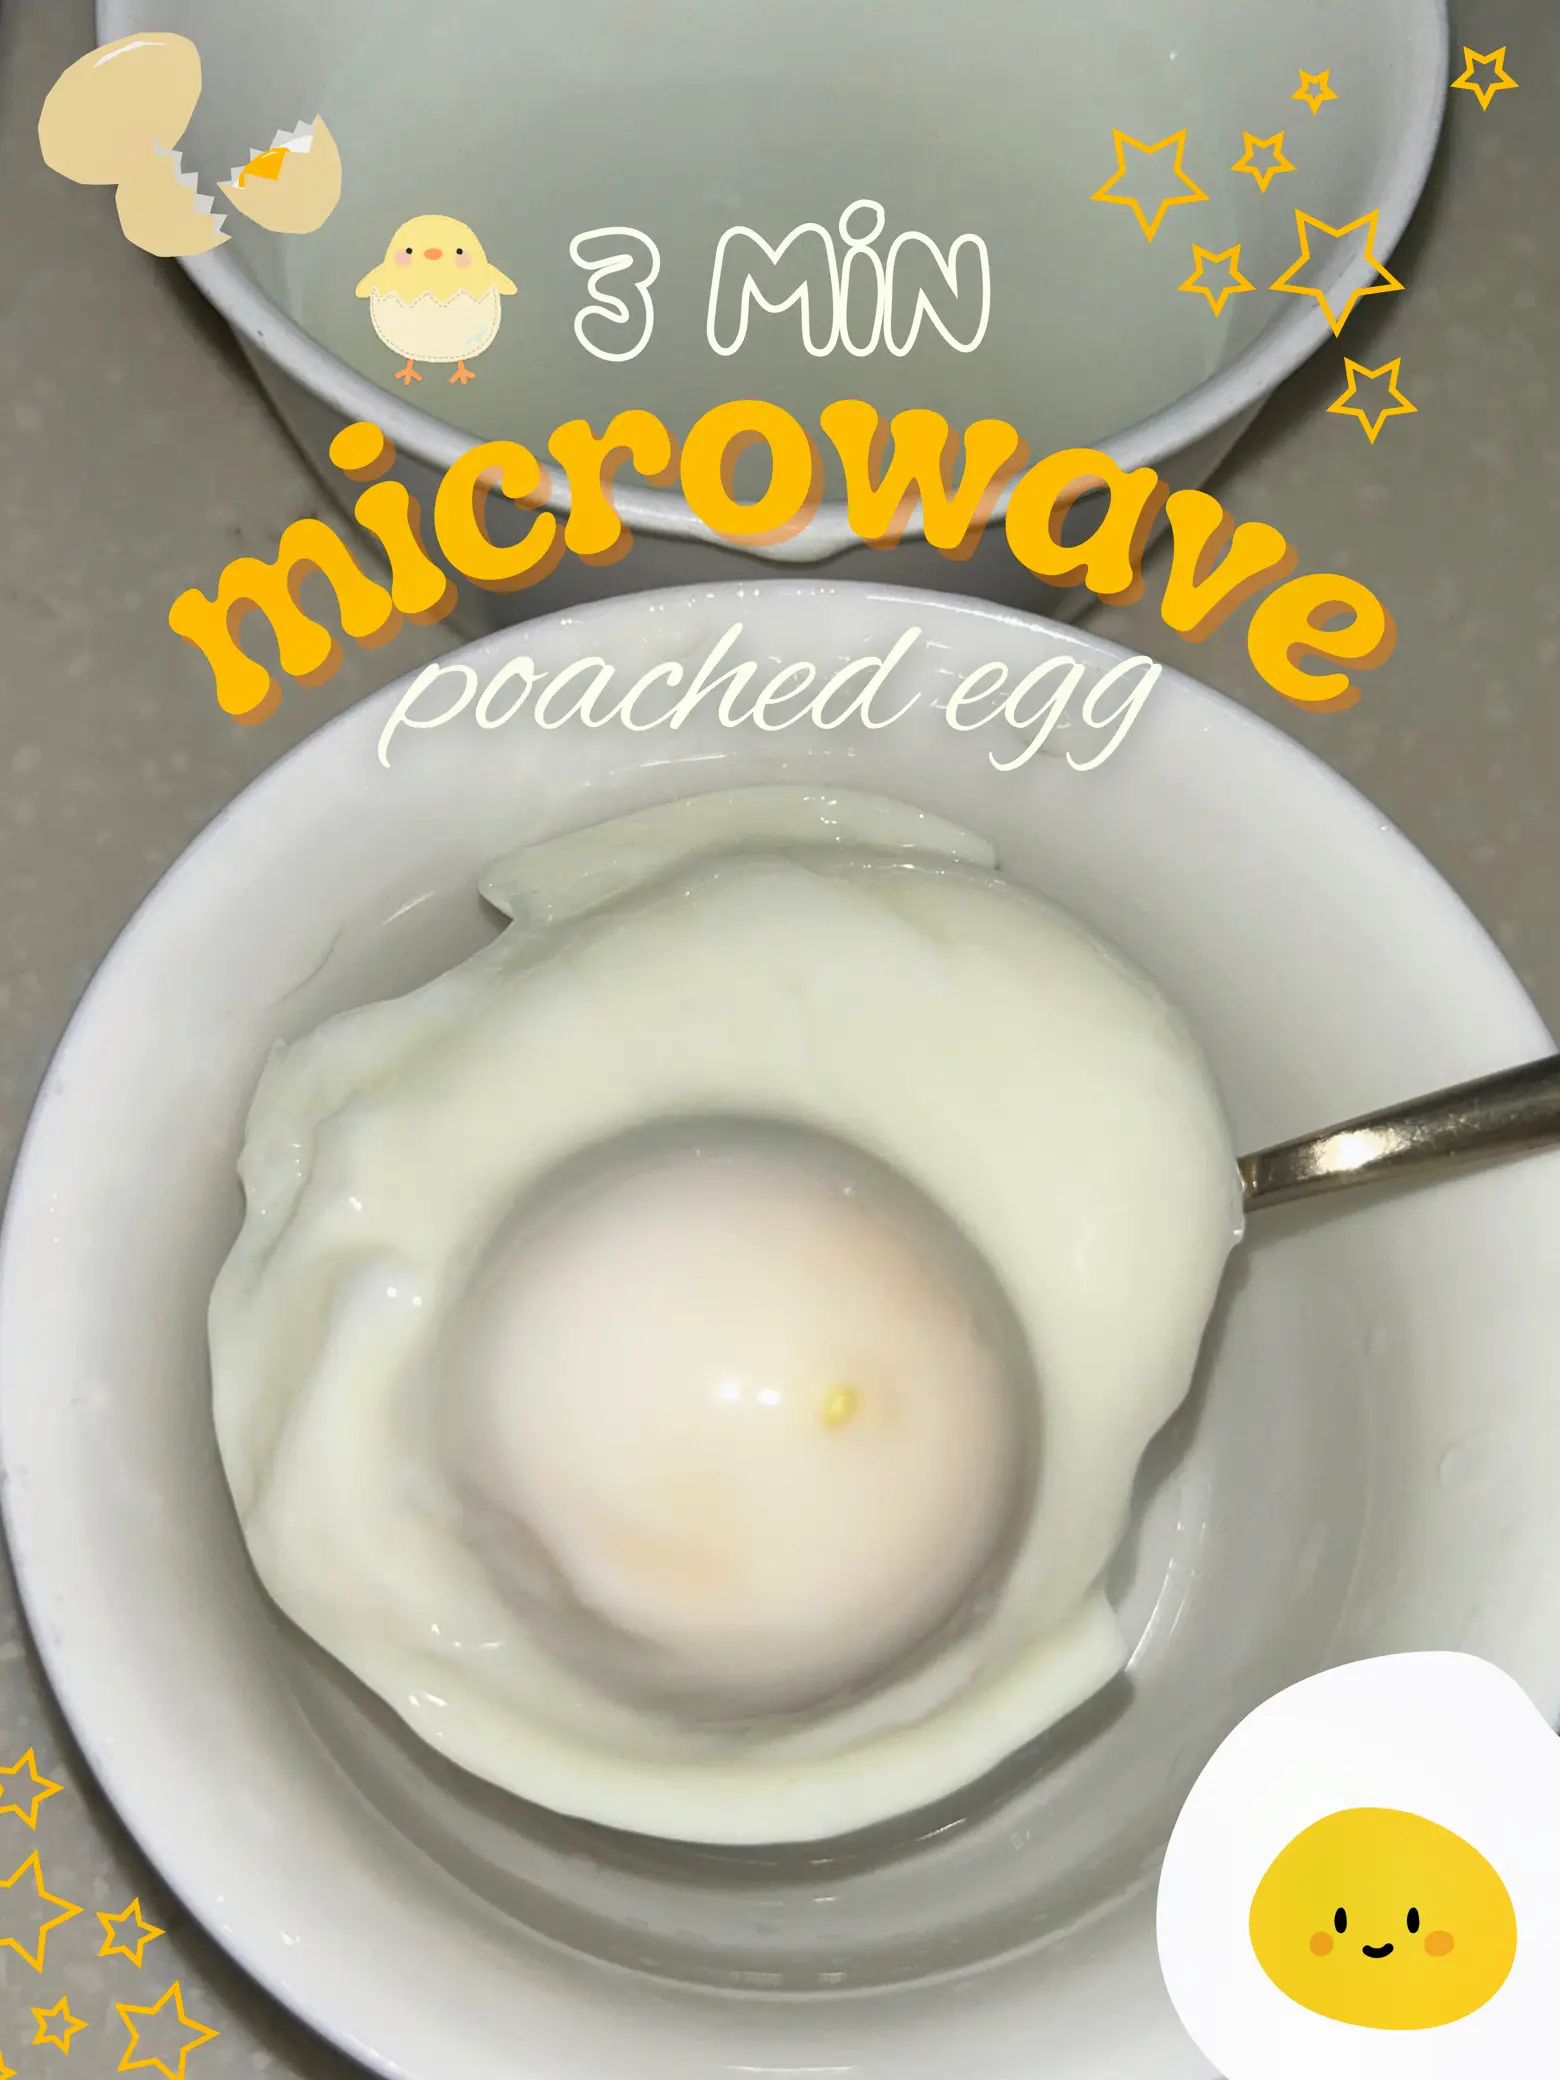 Microwave Poached Eggs Recipe and Nutrition - Eat This Much